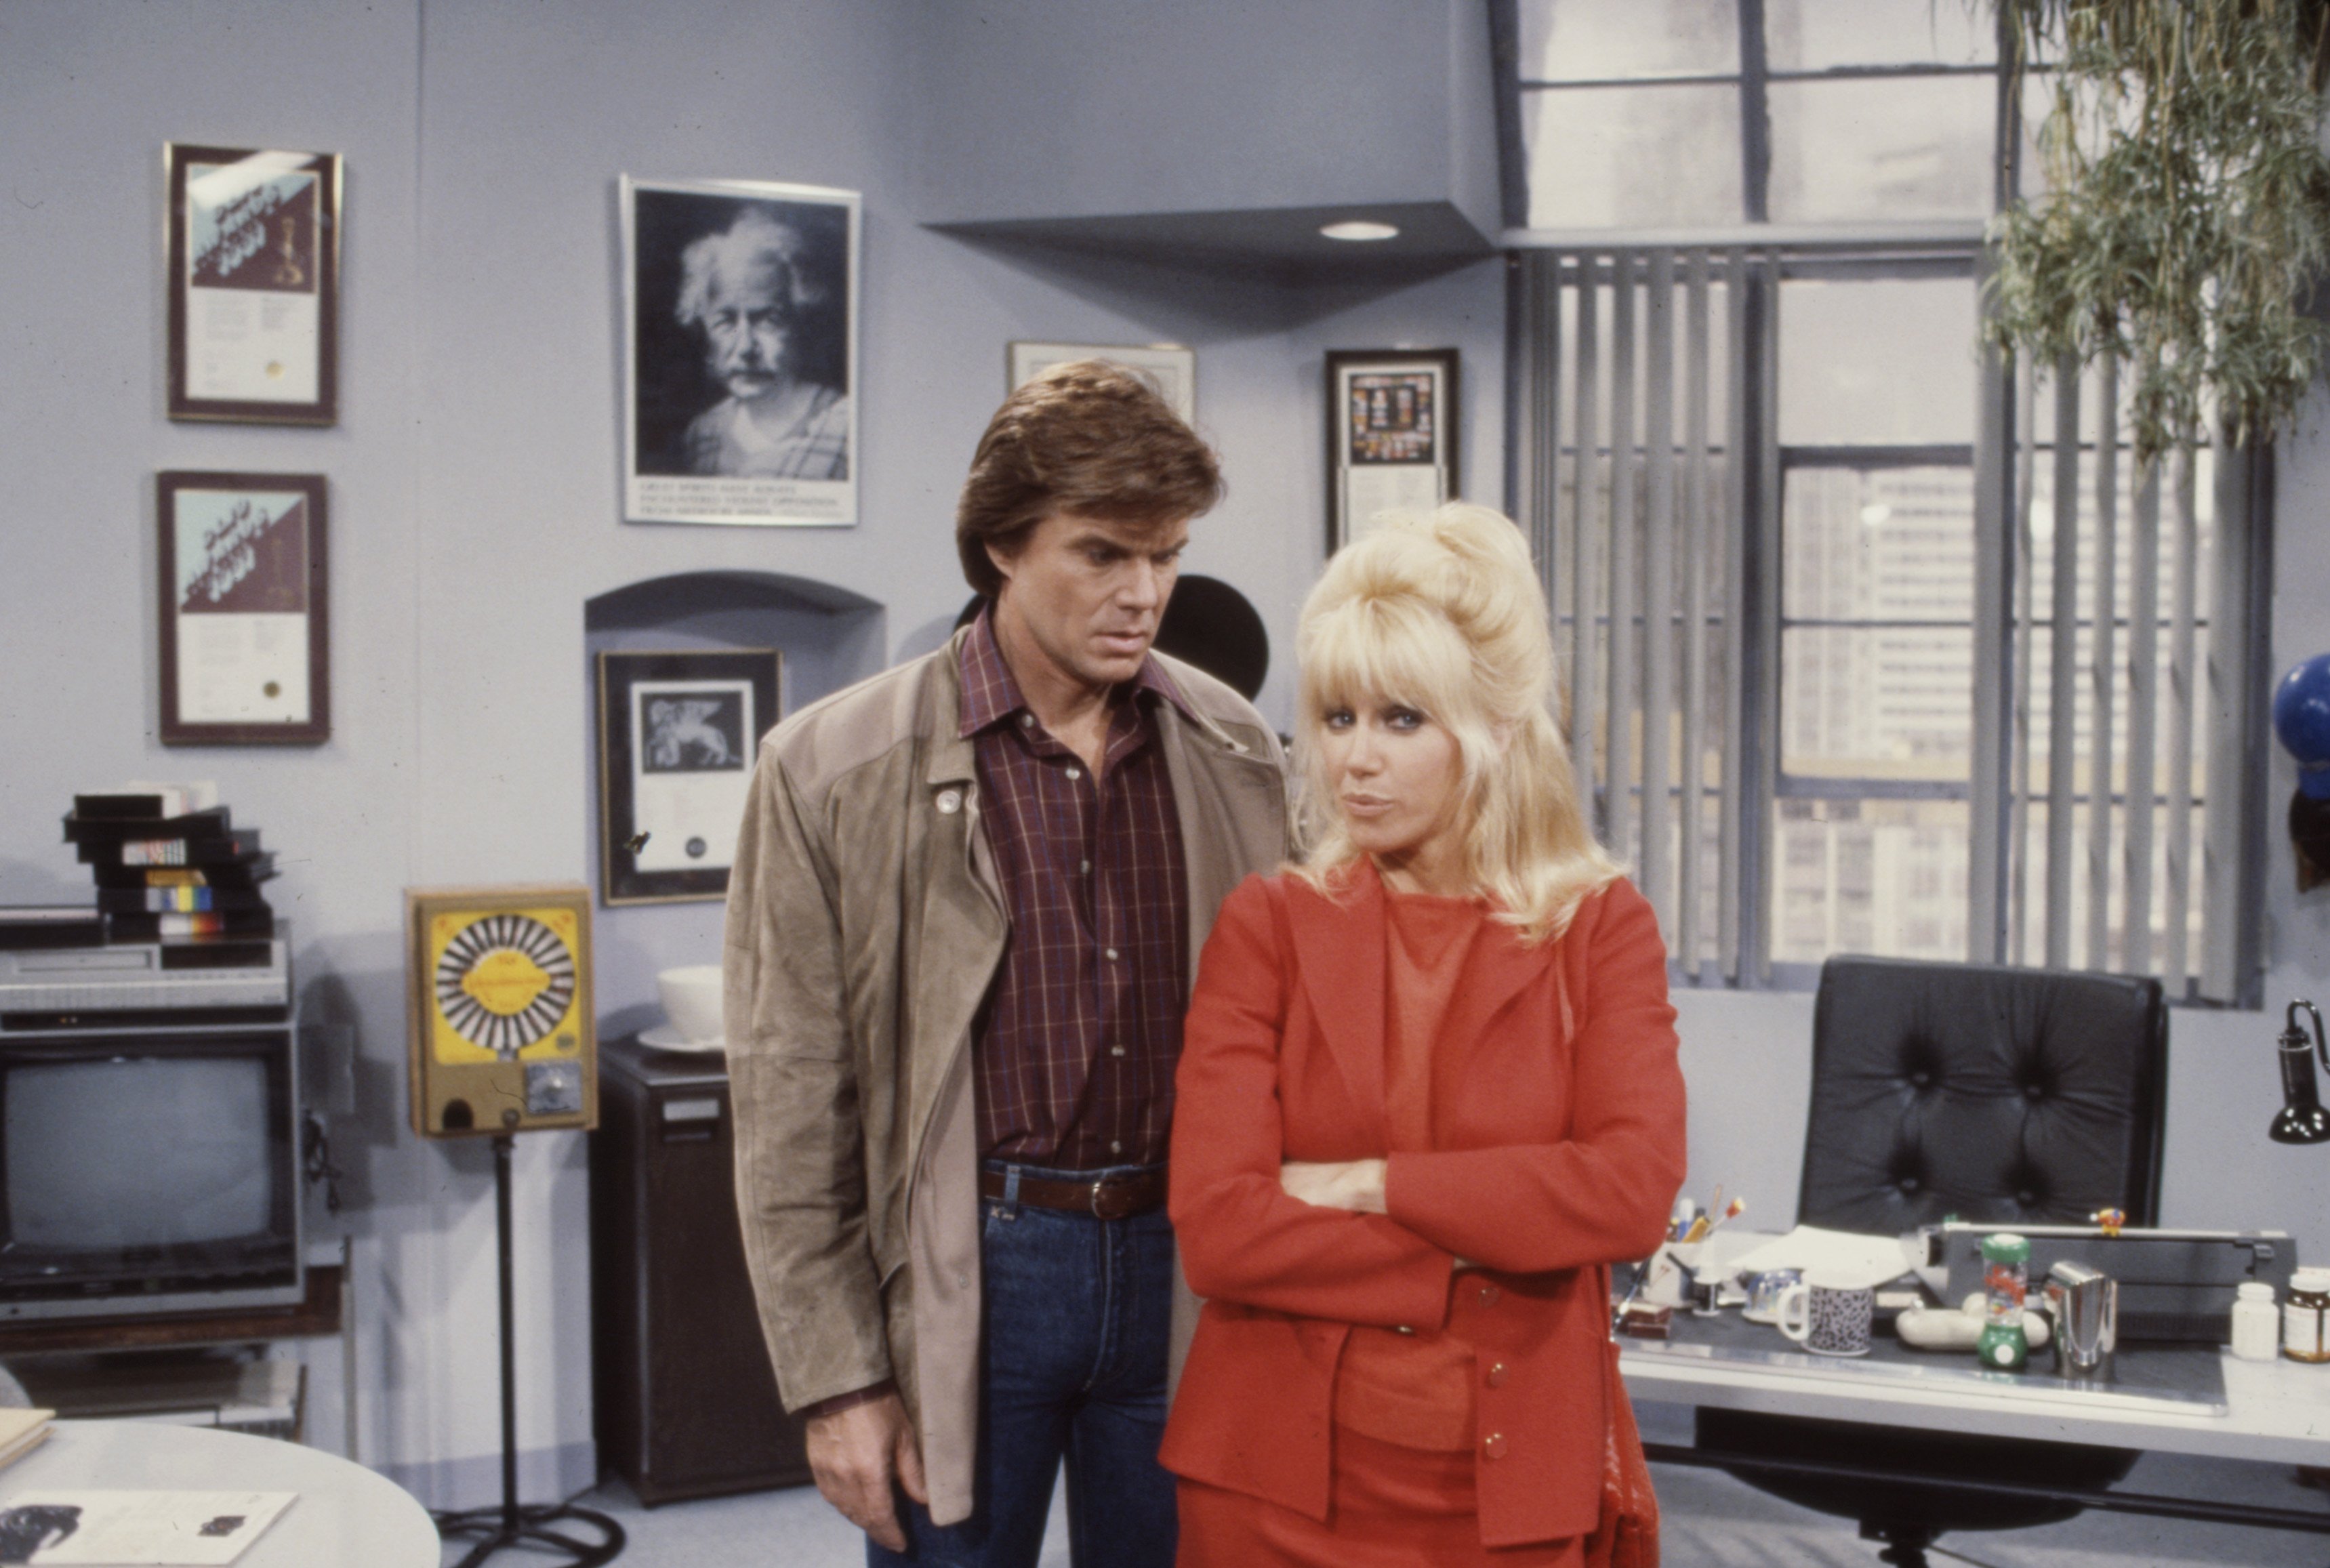 Actor John Davidson and actress Suzanne Somers appearing in the ABC TV show "Goodbye Charlie," on June 4, 1985 ┃Source: Getty Images